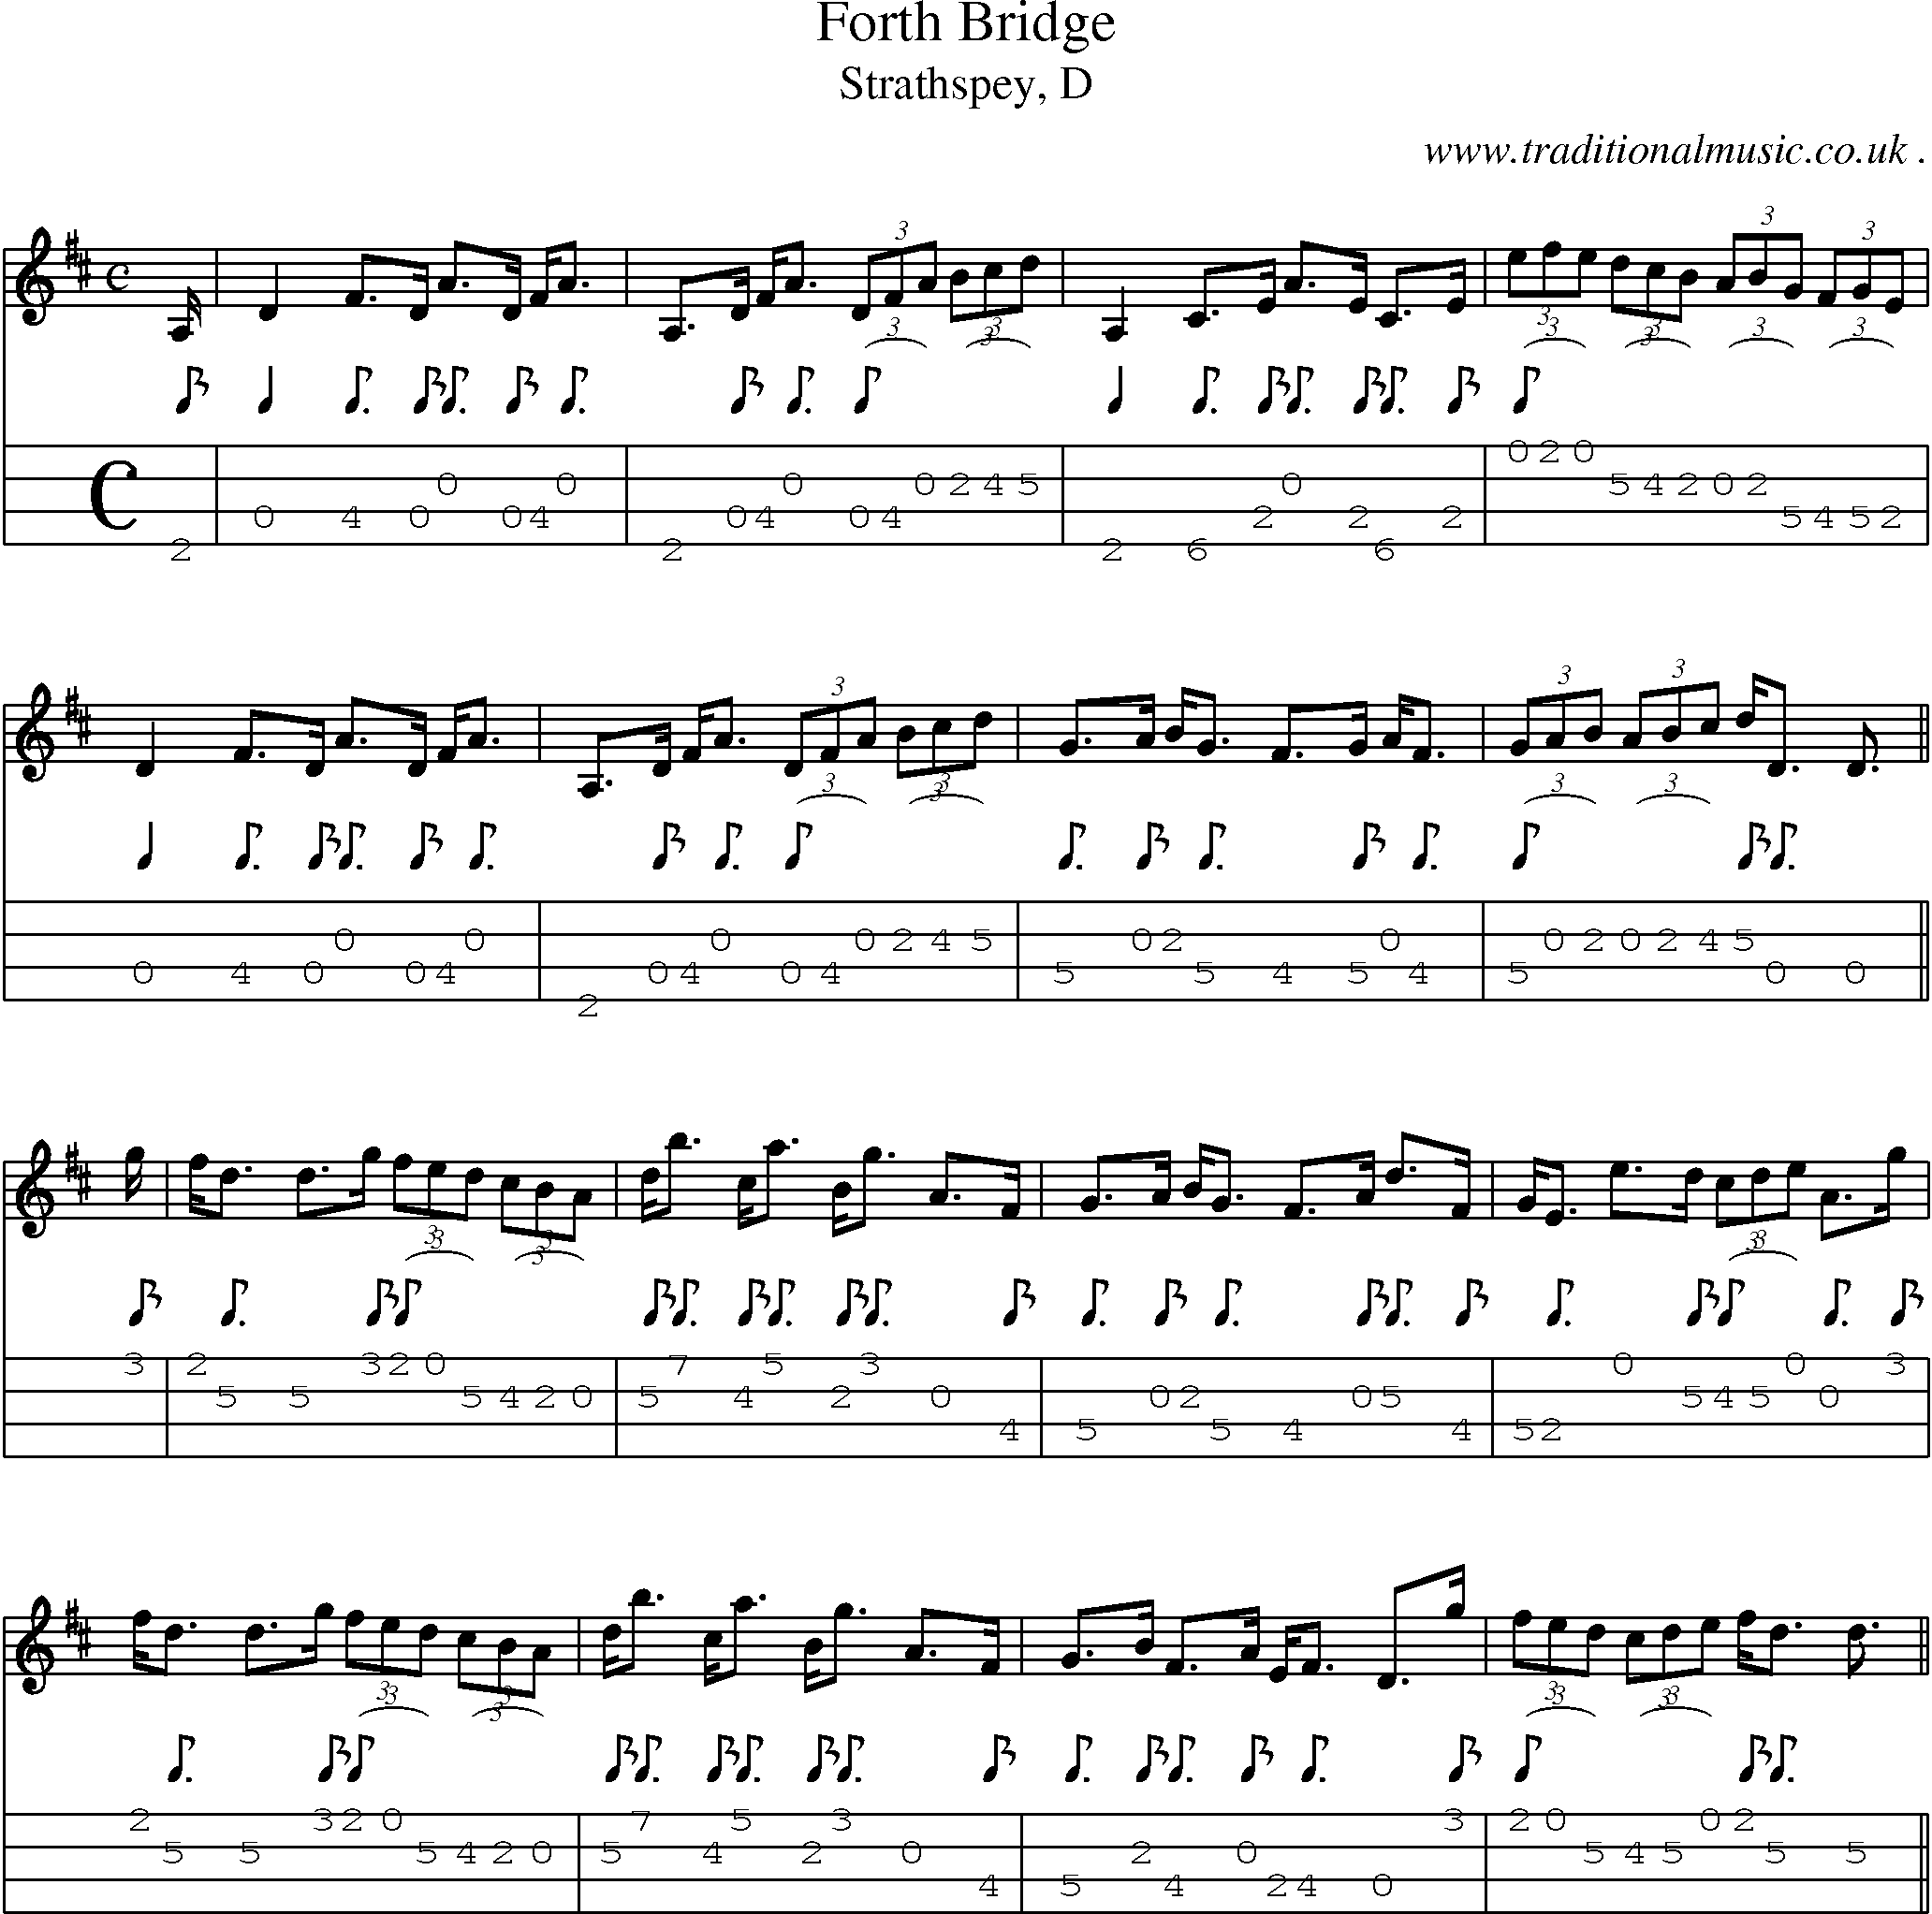 Sheet-music  score, Chords and Mandolin Tabs for Forth Bridge